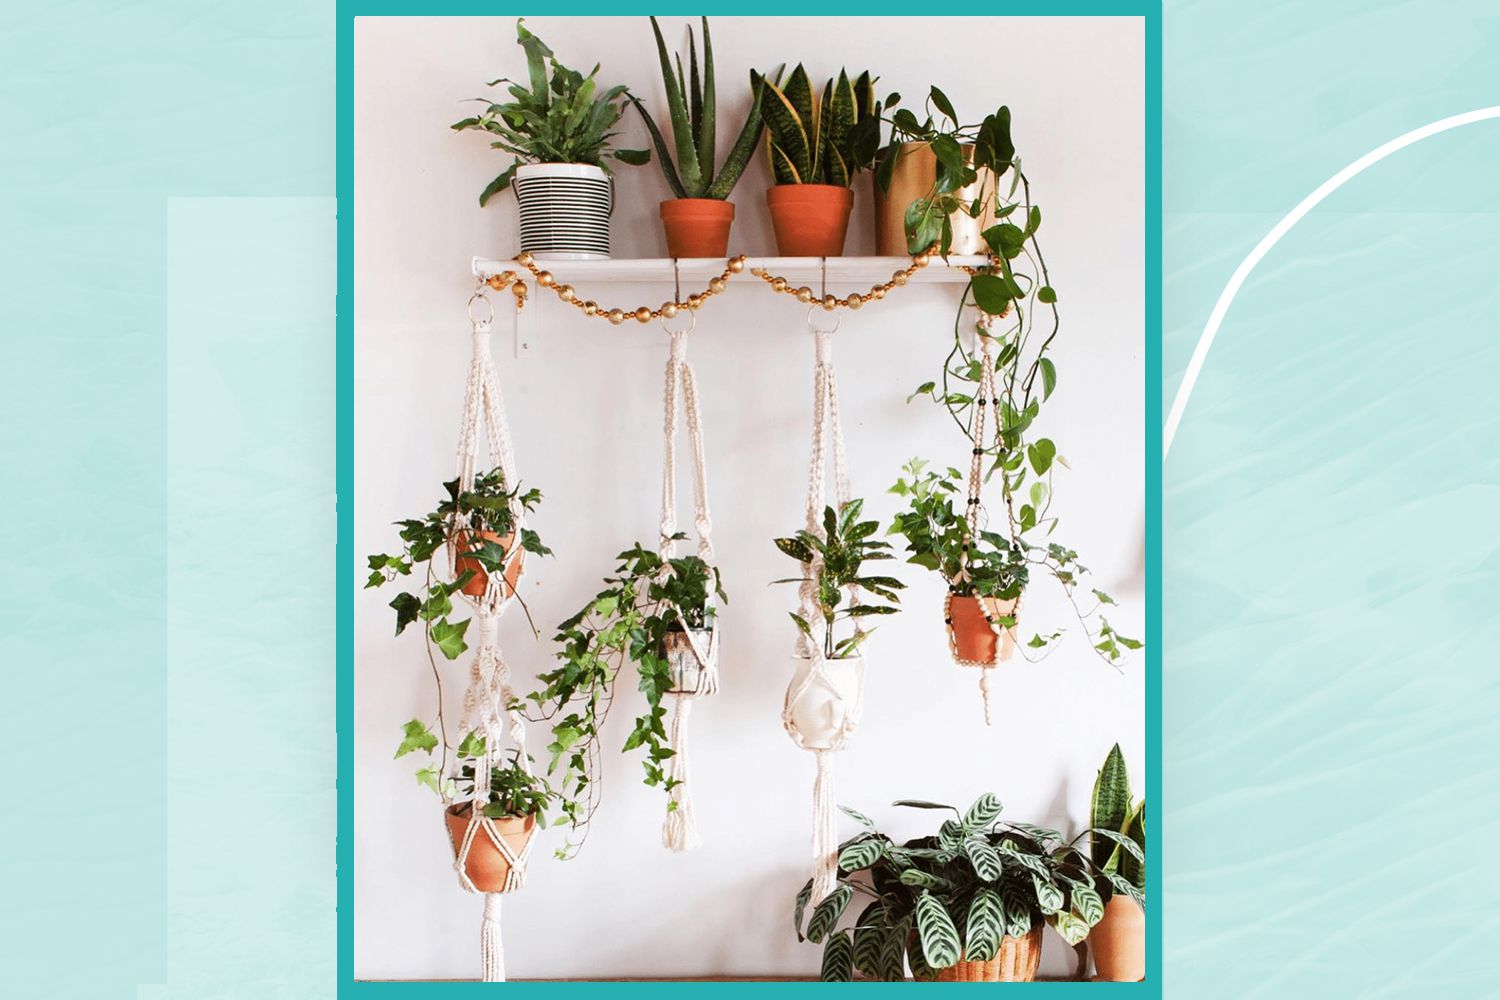 Influencers Share Their Favorite Plant Products to Shop at IKEA